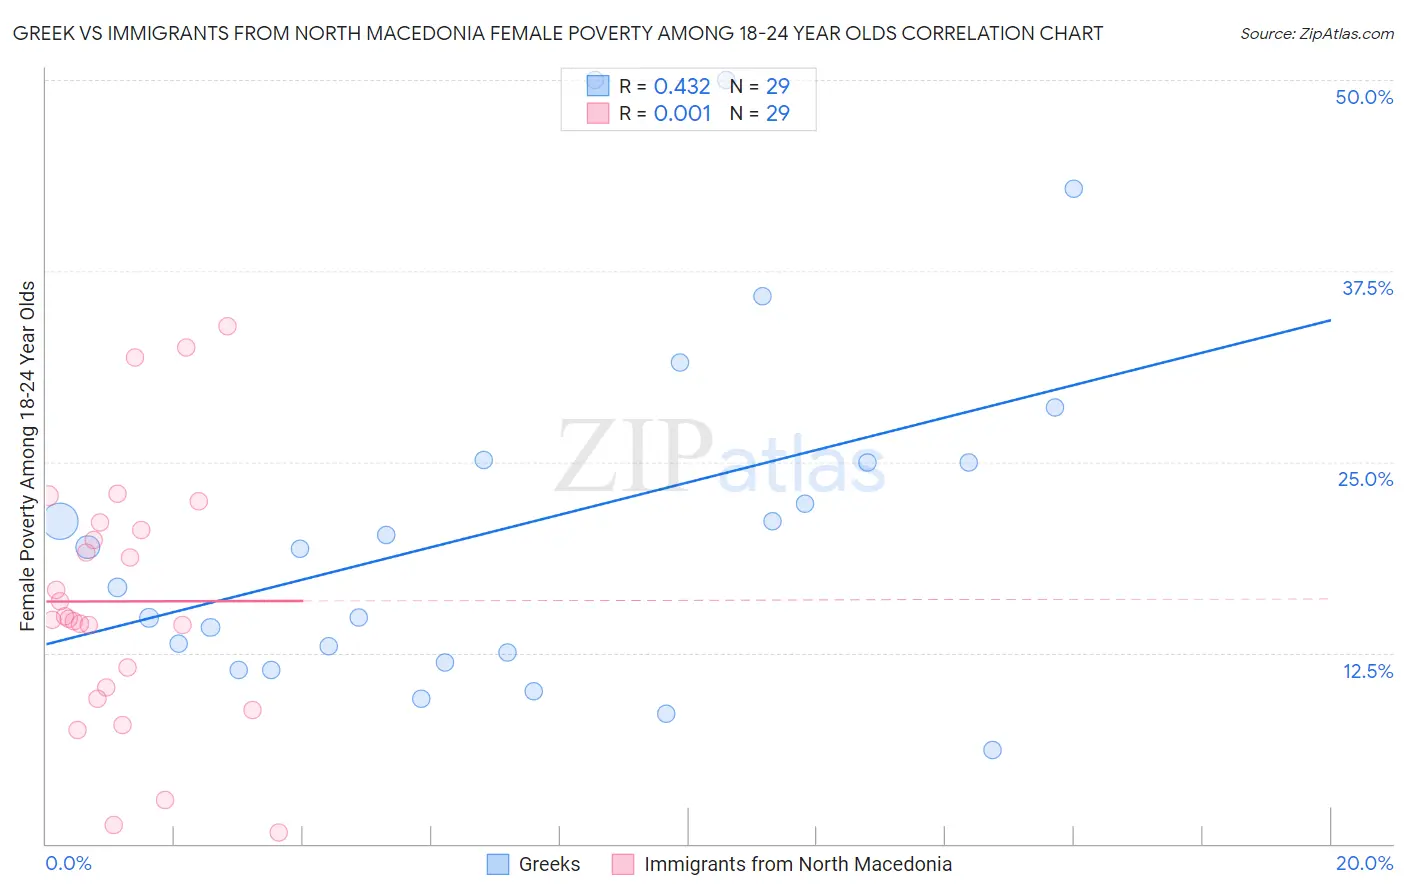 Greek vs Immigrants from North Macedonia Female Poverty Among 18-24 Year Olds